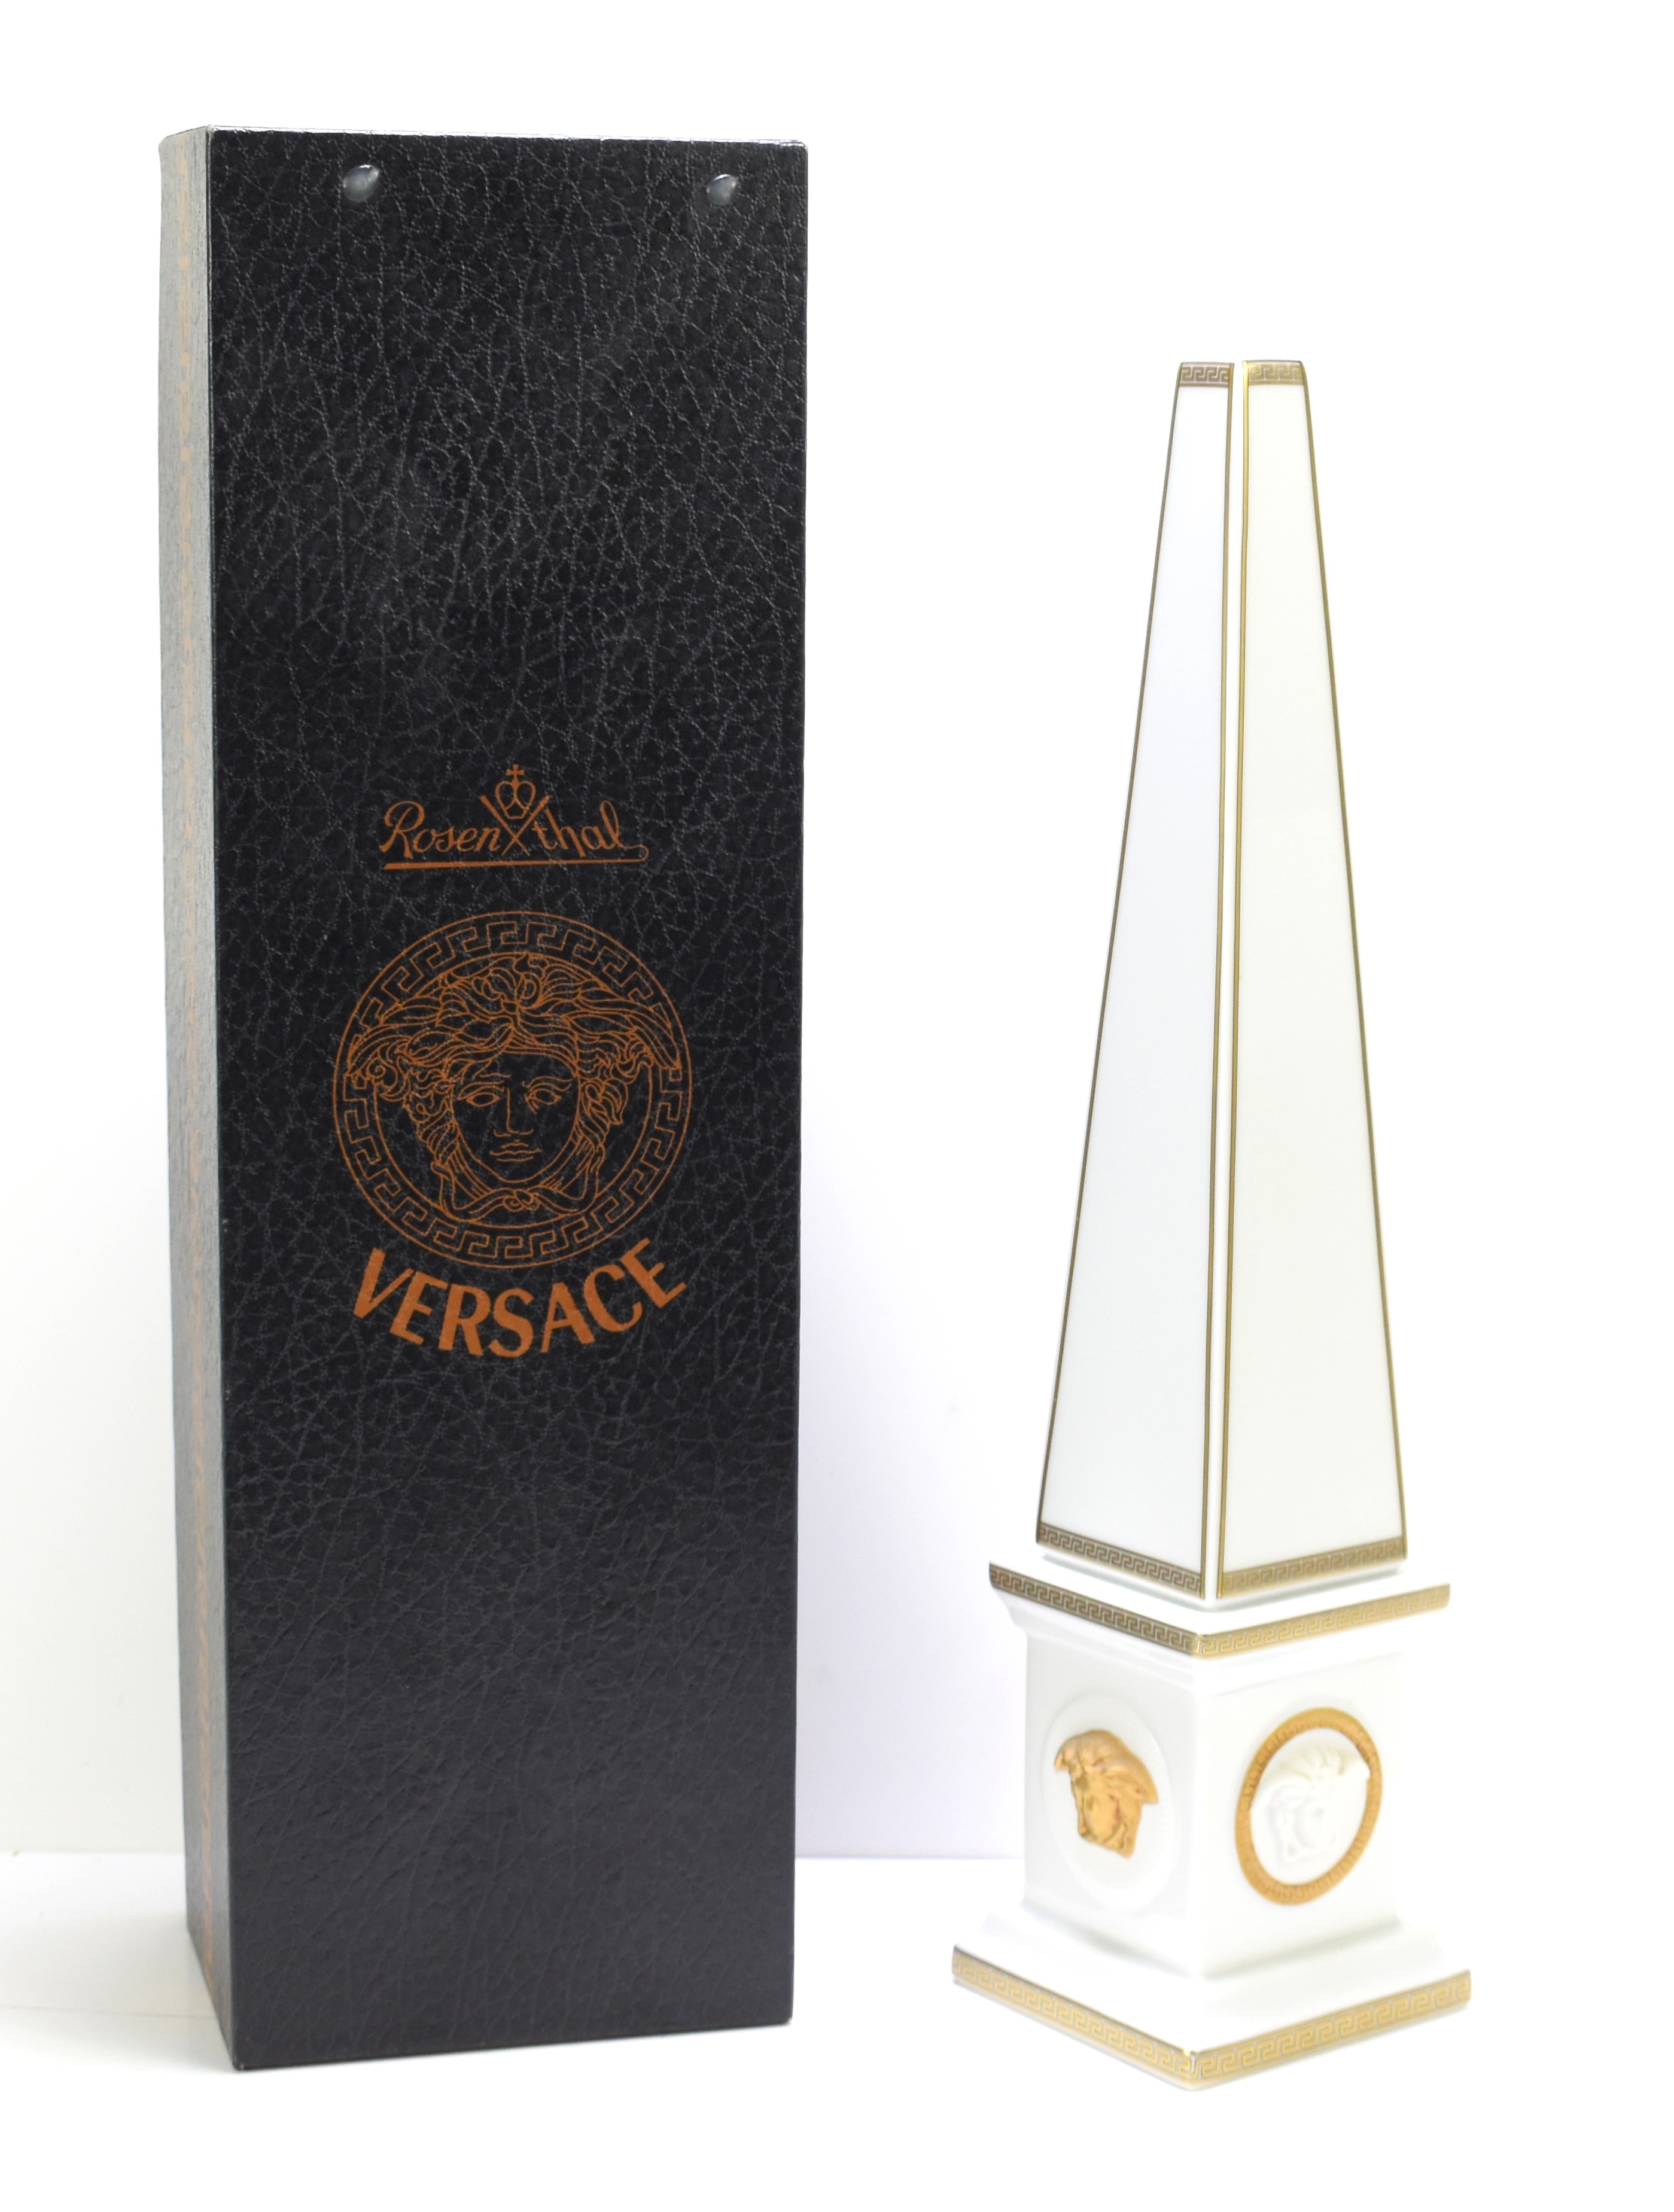 Sold at Auction: Genuine Rosenthal for Versace *NEW* in box